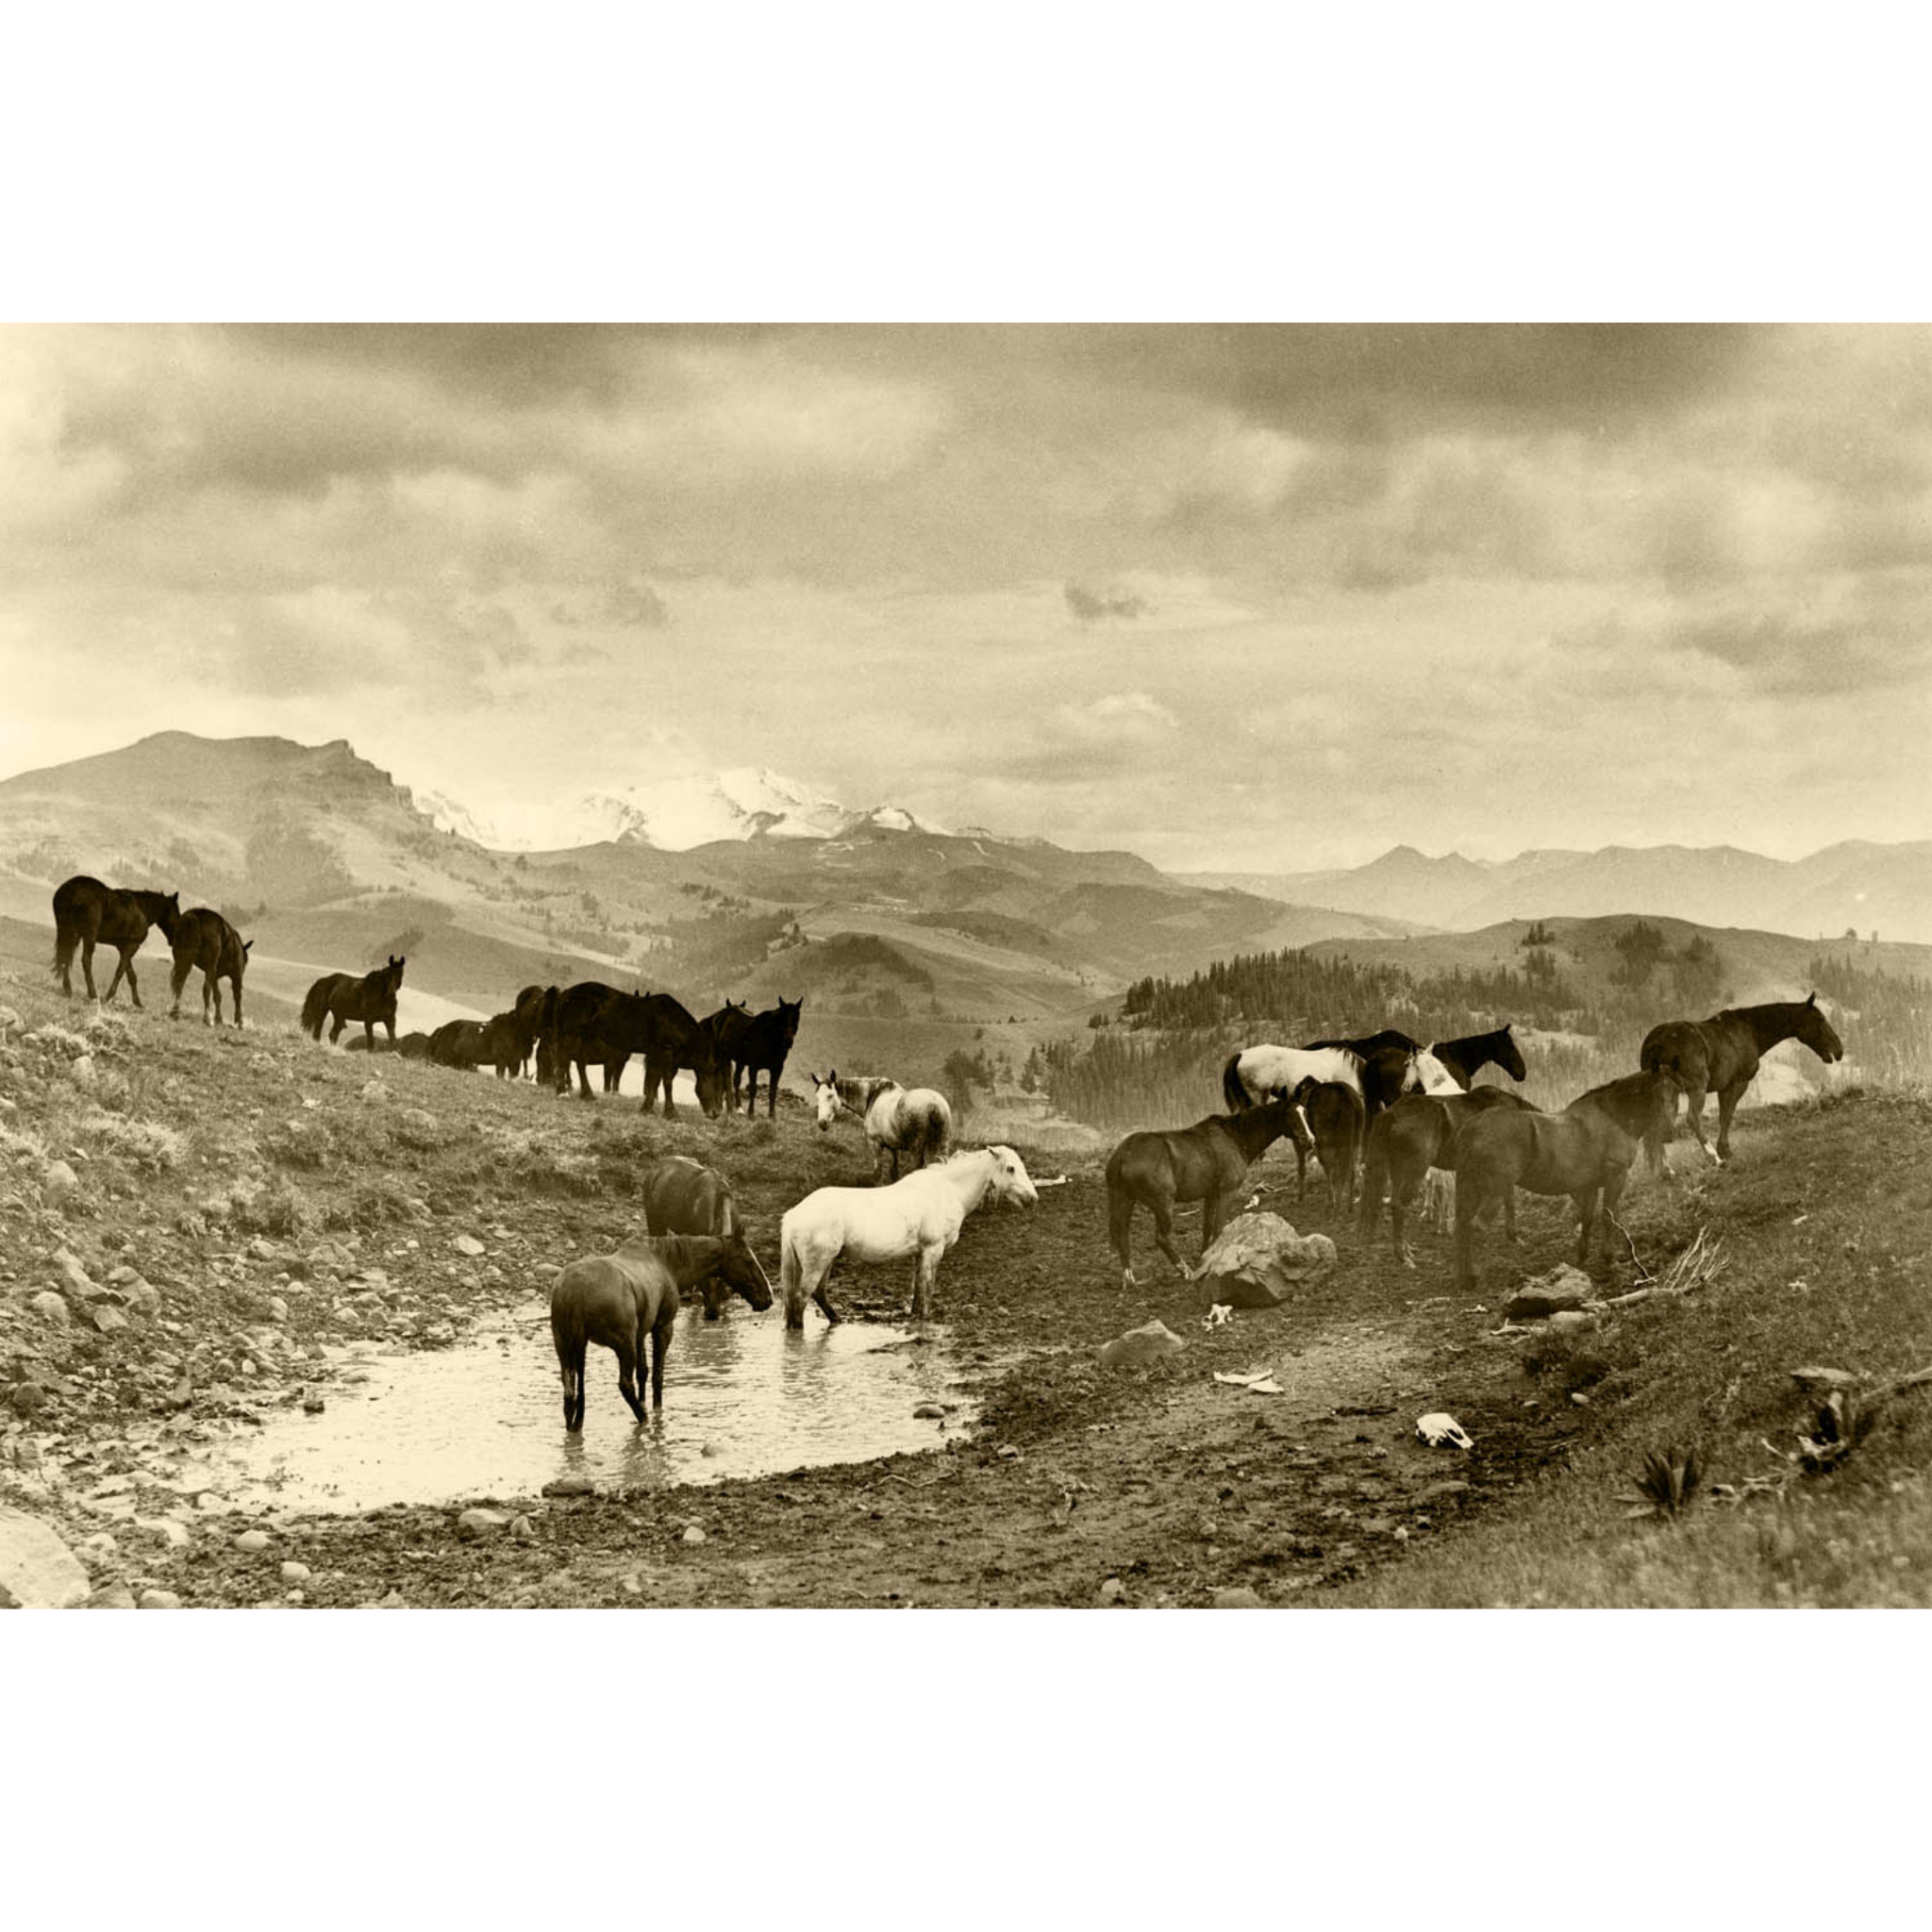 Herd of Horses in the Big Horn Mountains - 1935 Charles Belden Photograph